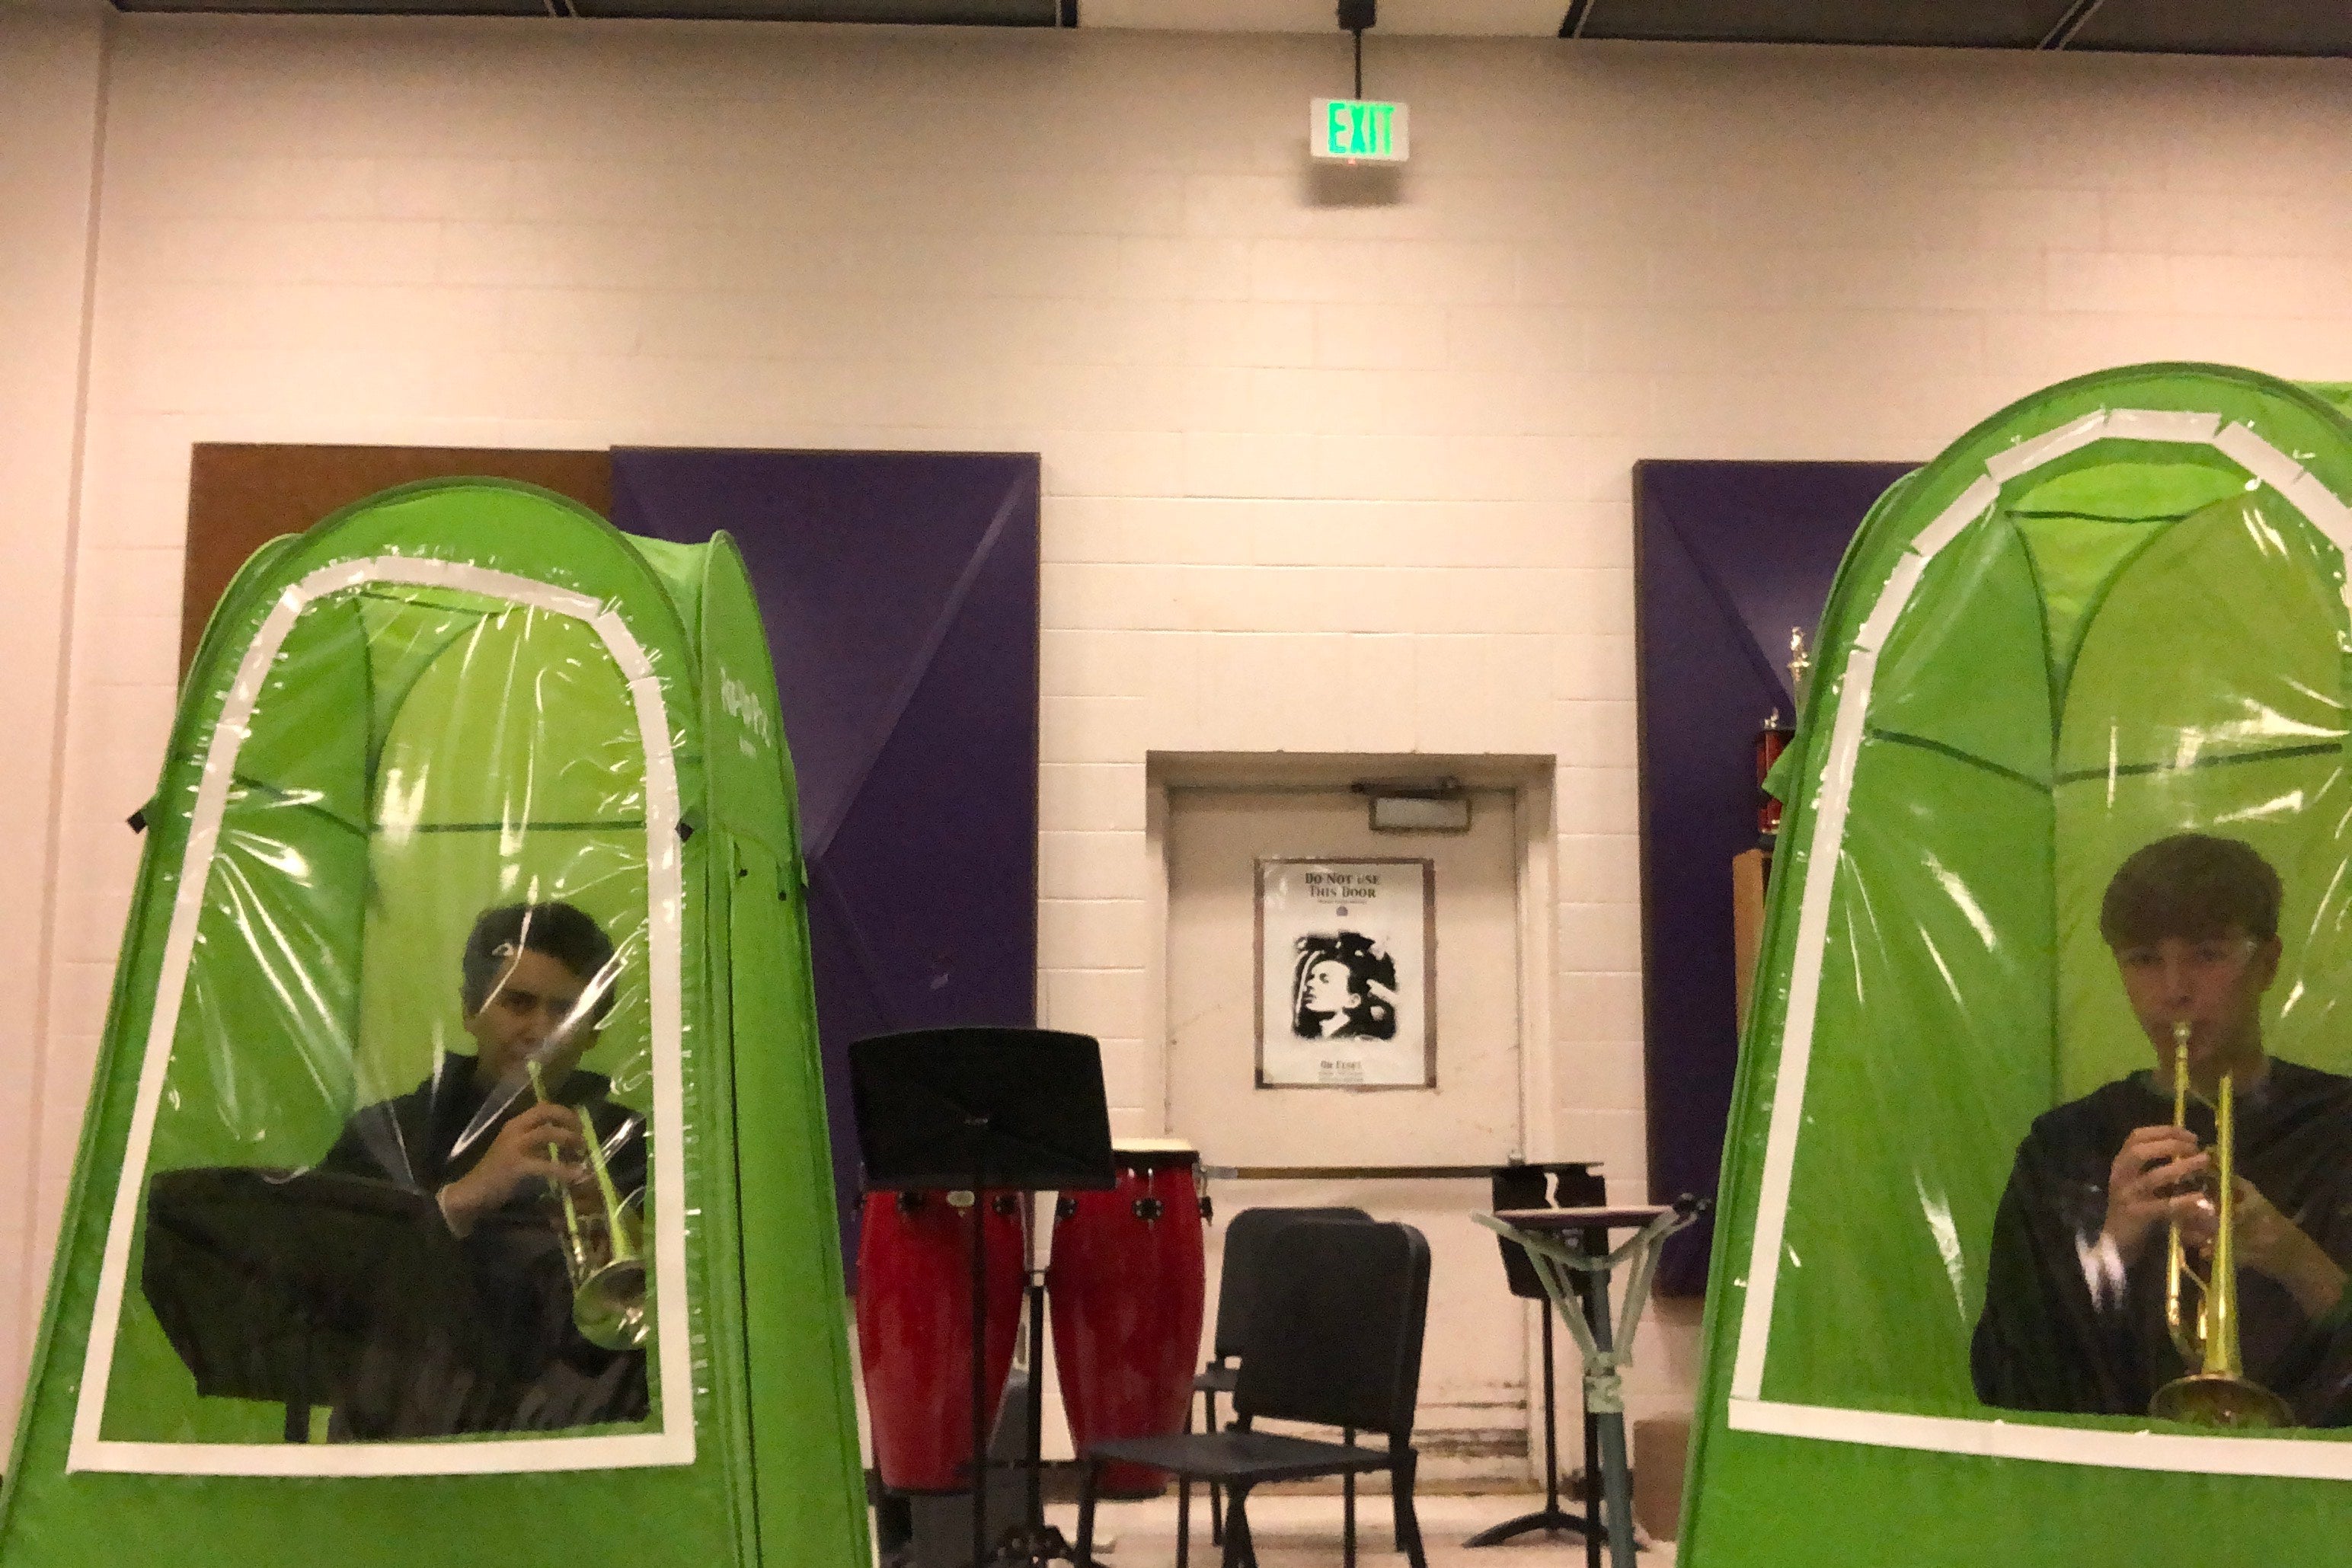 Two trumpet players practice in separate green tents inside a school band room.